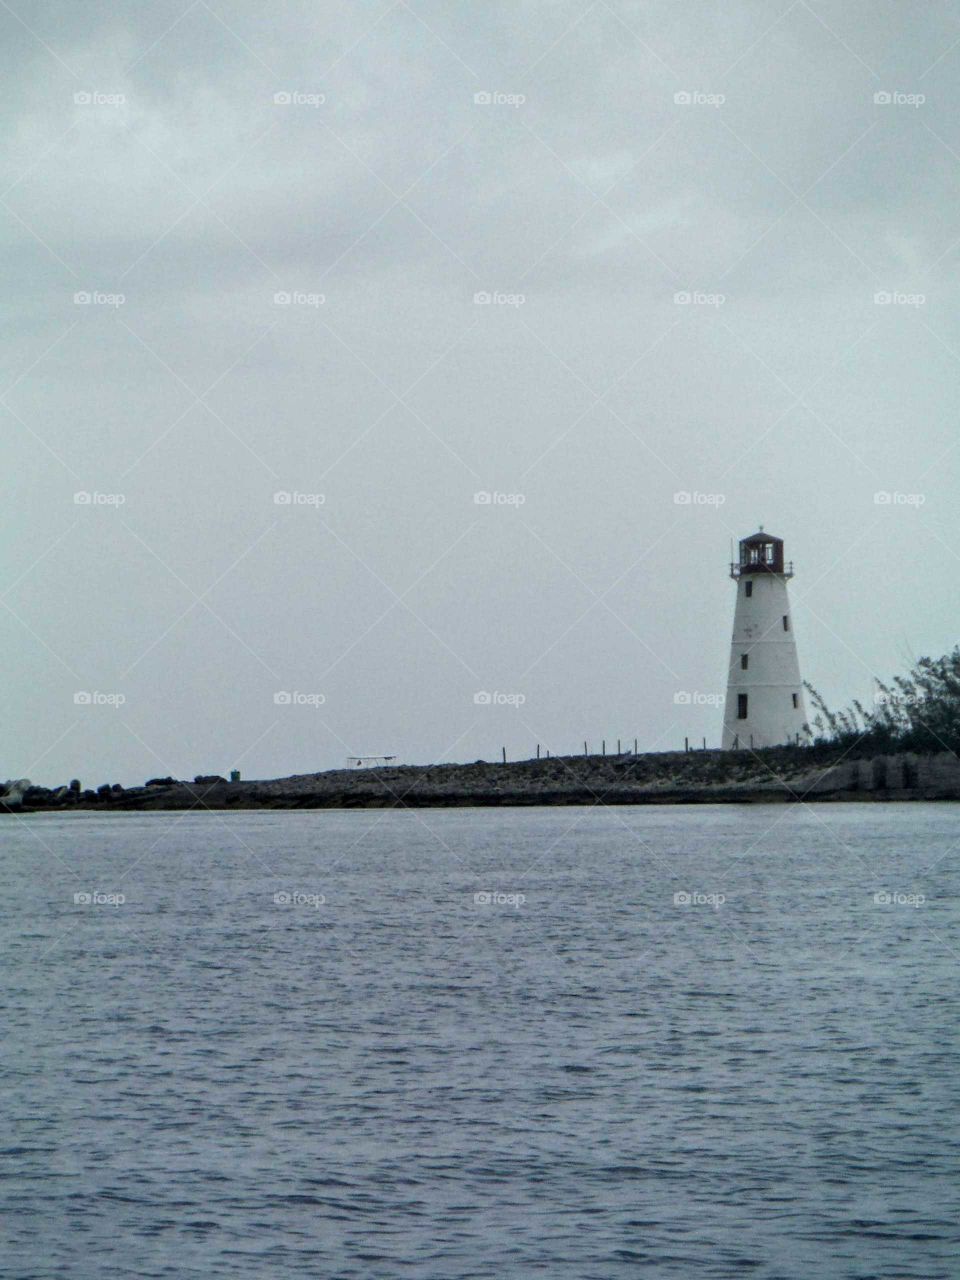 lonely lighthouse